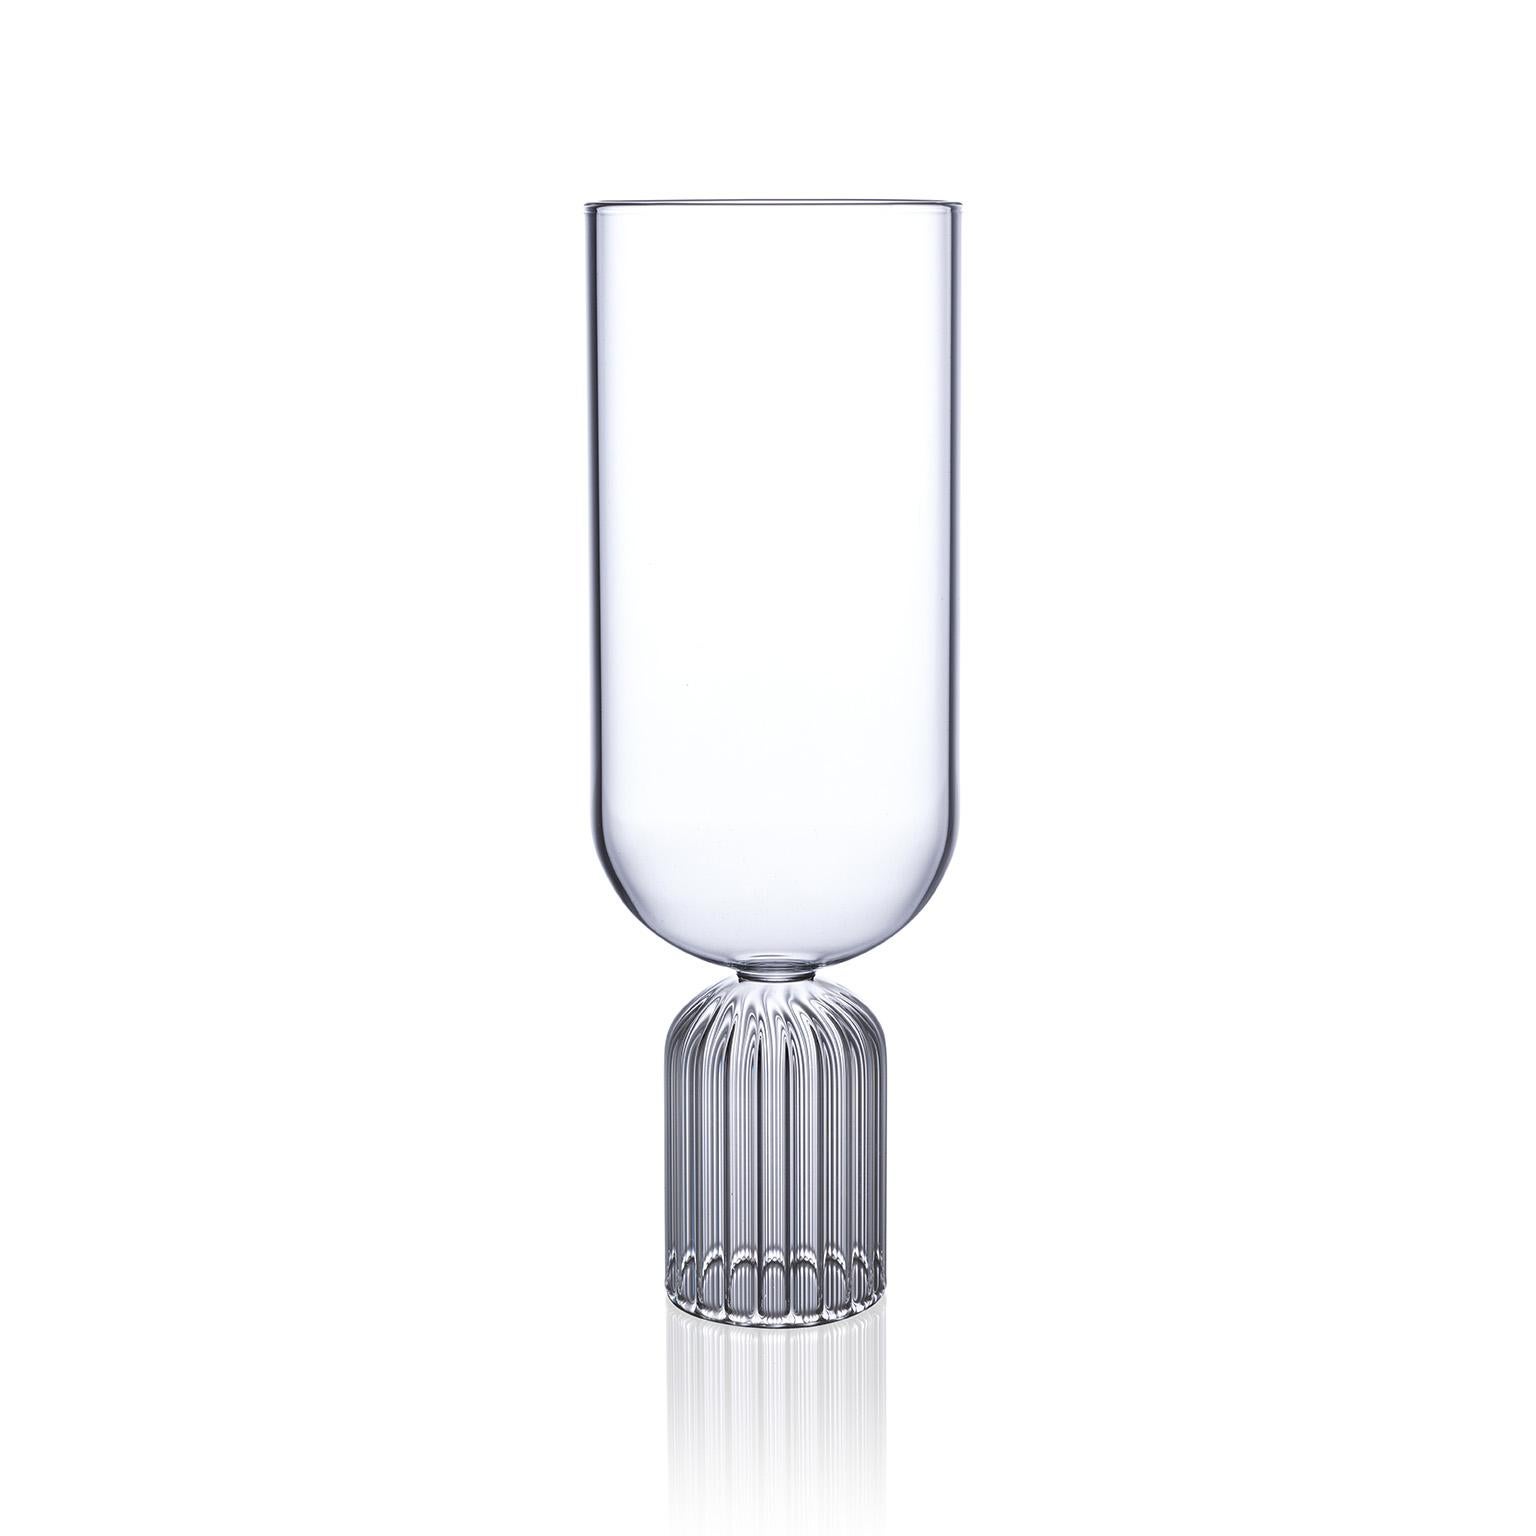 May medium tall glasses, set of two

A pair of Czech contemporary handcrafted glasses perfect for everyday use.

The May collection is inspired by the lightness of the early summer month of May. This contemporary collection with a nod to the